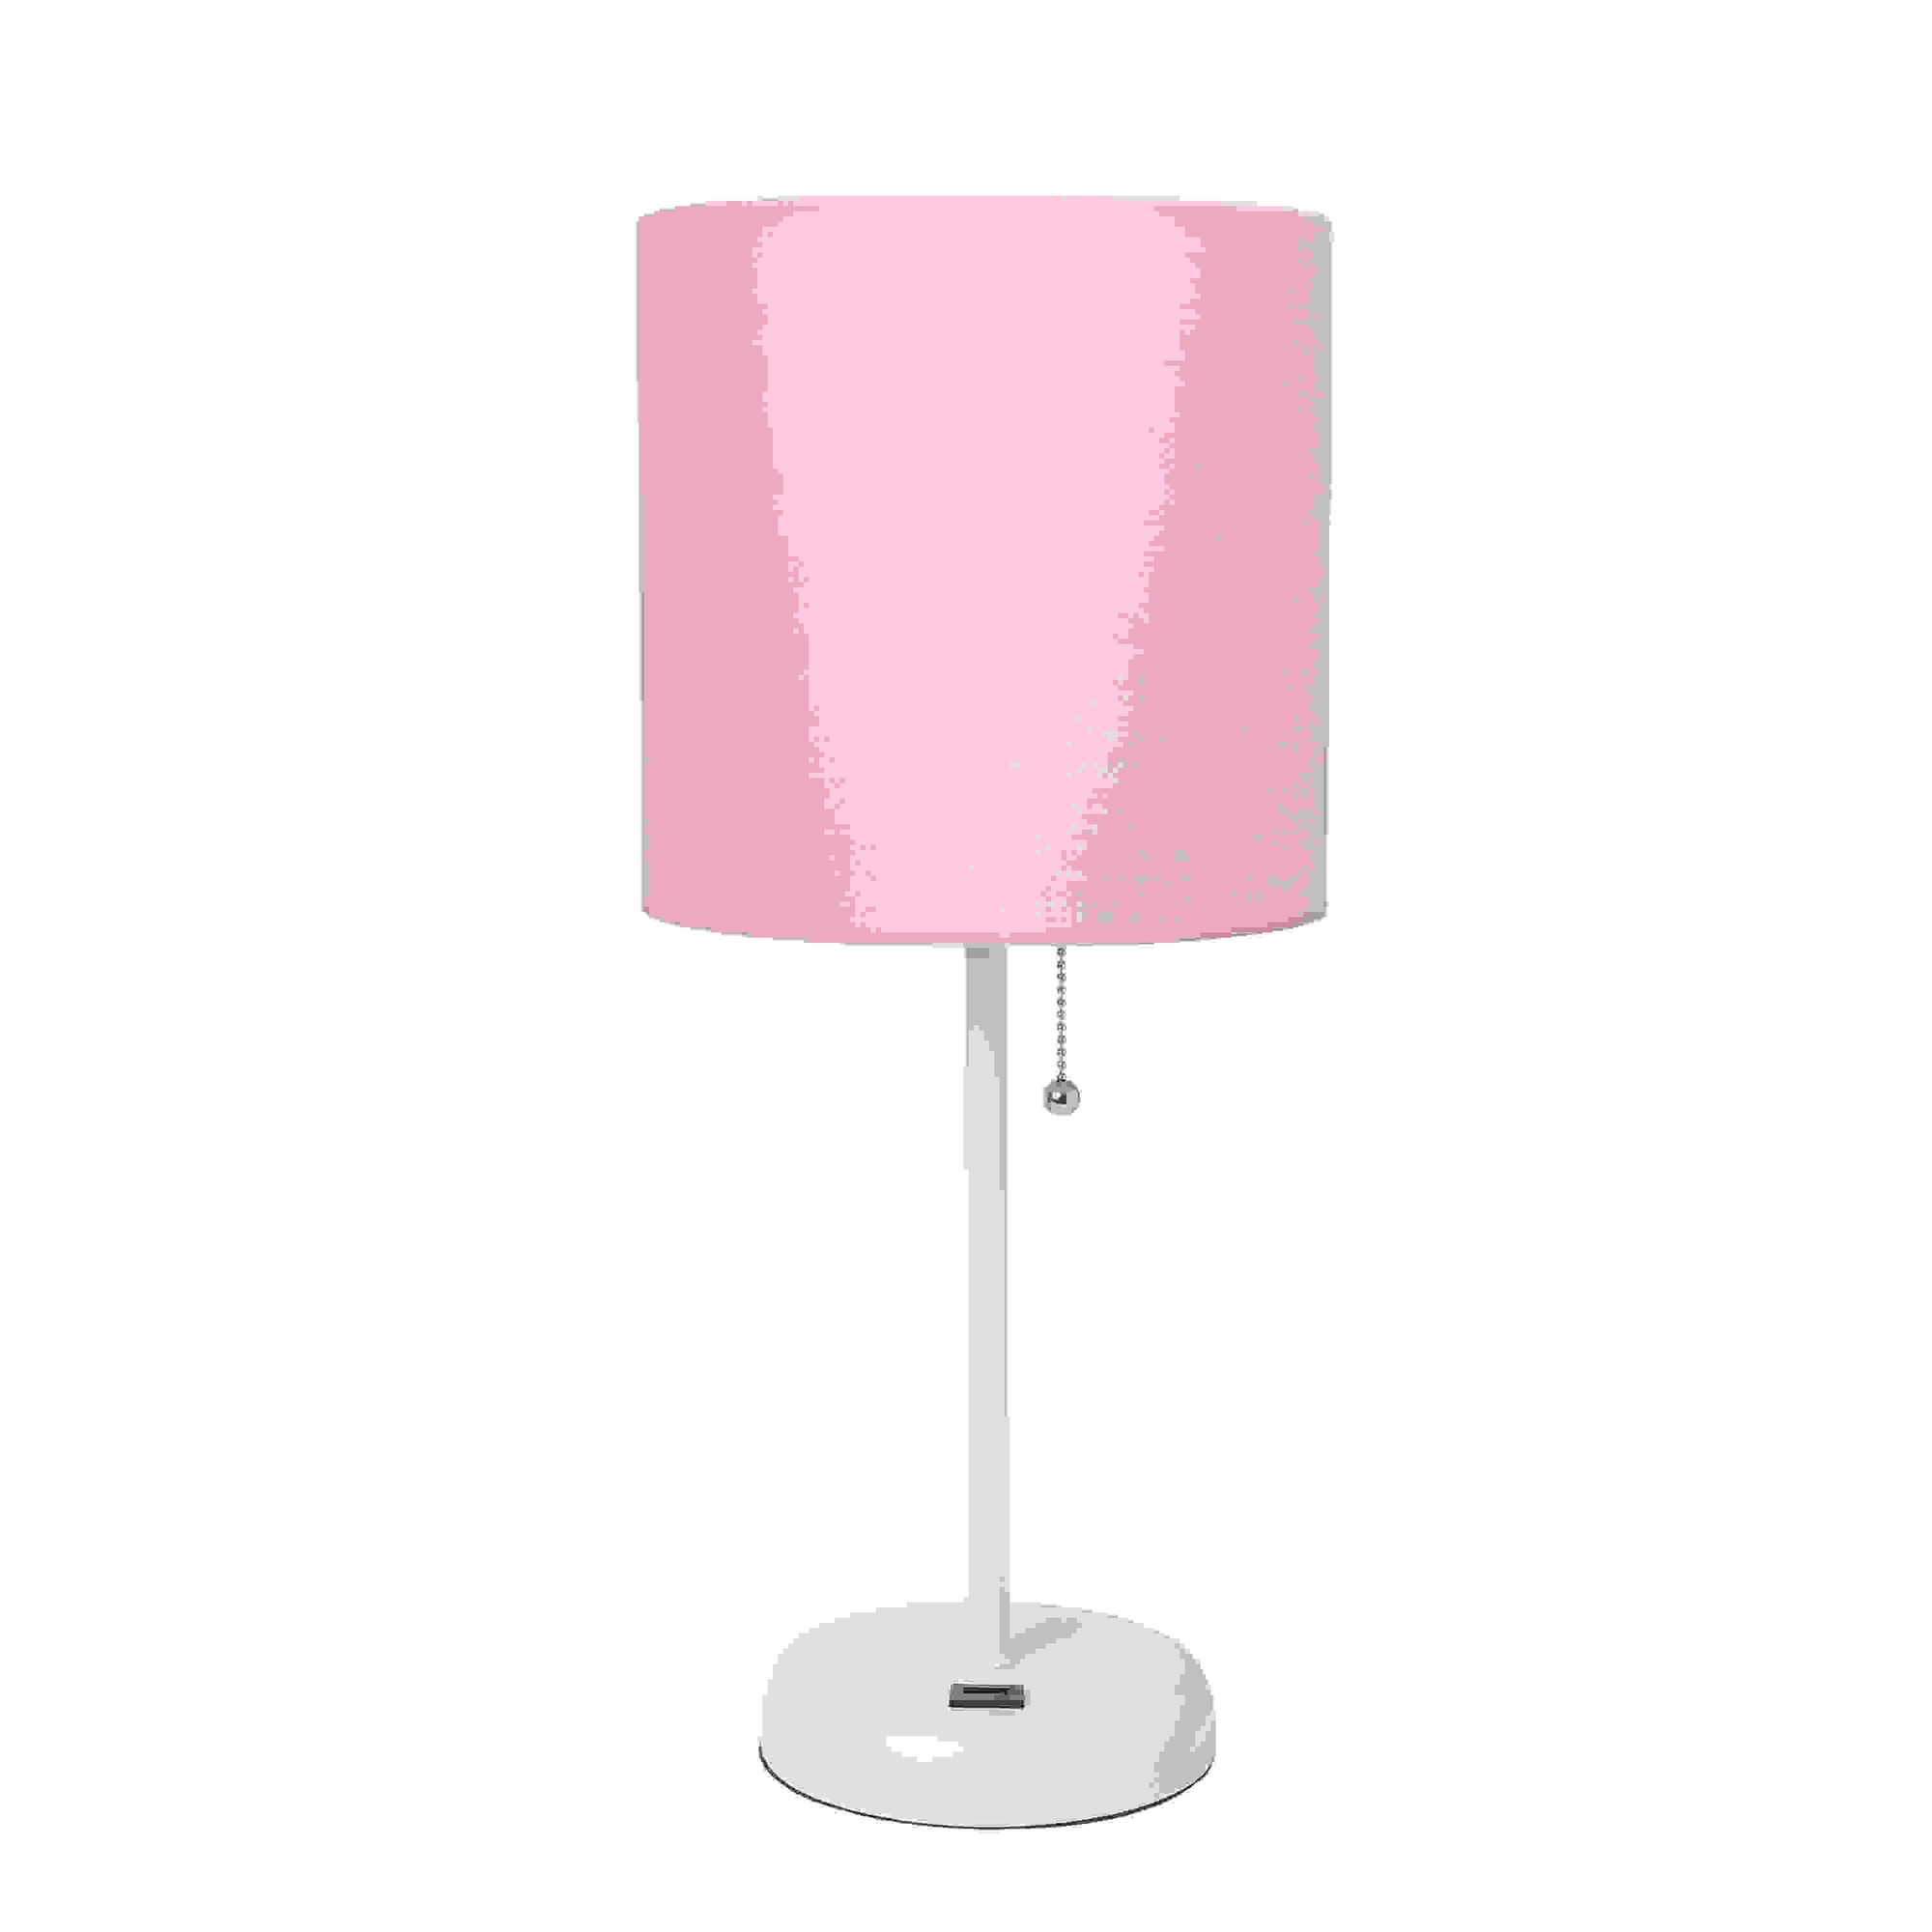 Simple Designs White Stick Lamp with USB charging port and Fabric Shade, Light Pink